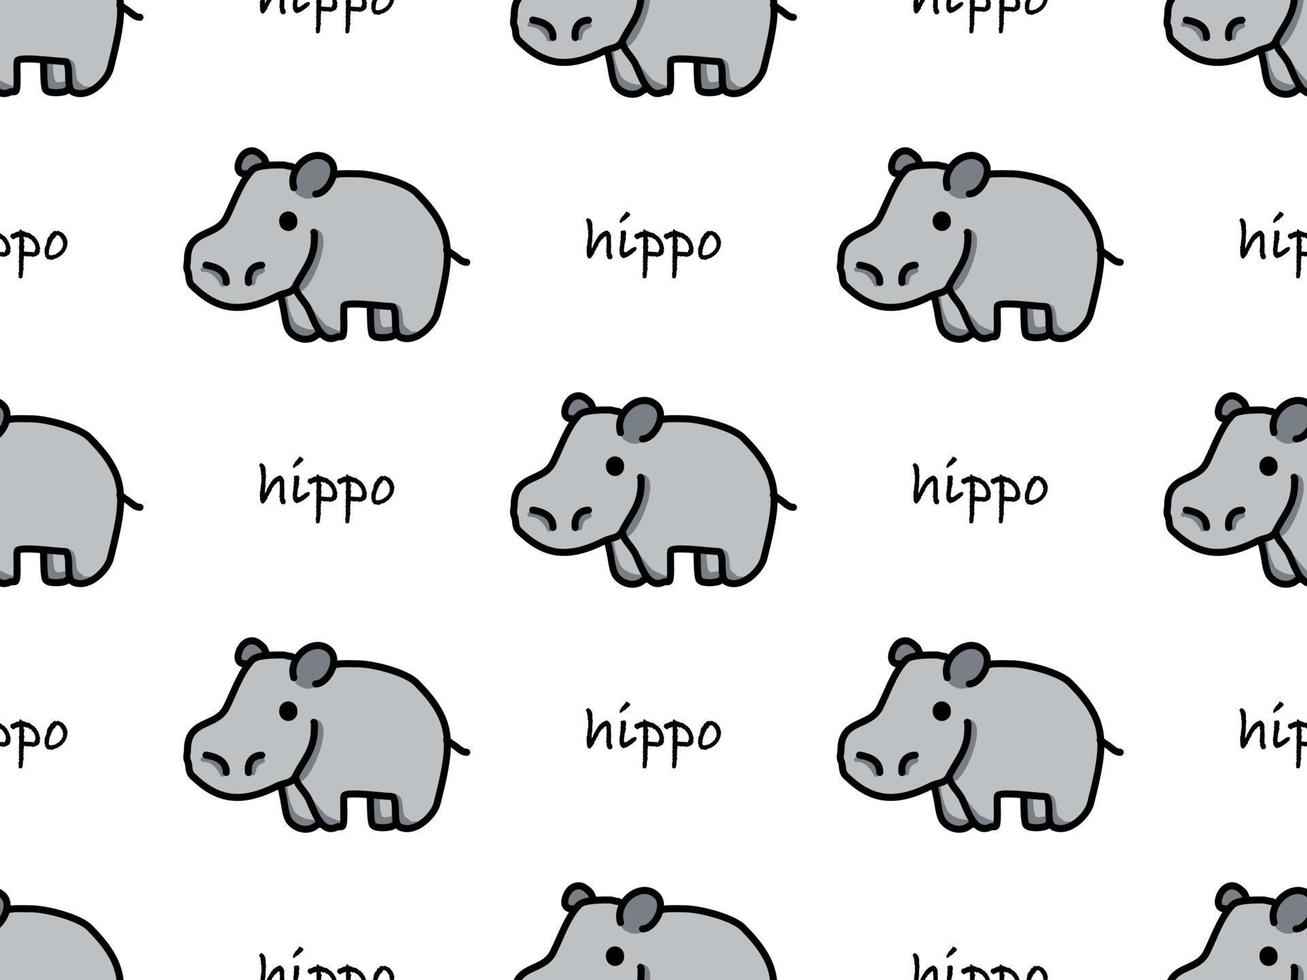 Hippo cartoon character seamless pattern on white background vector